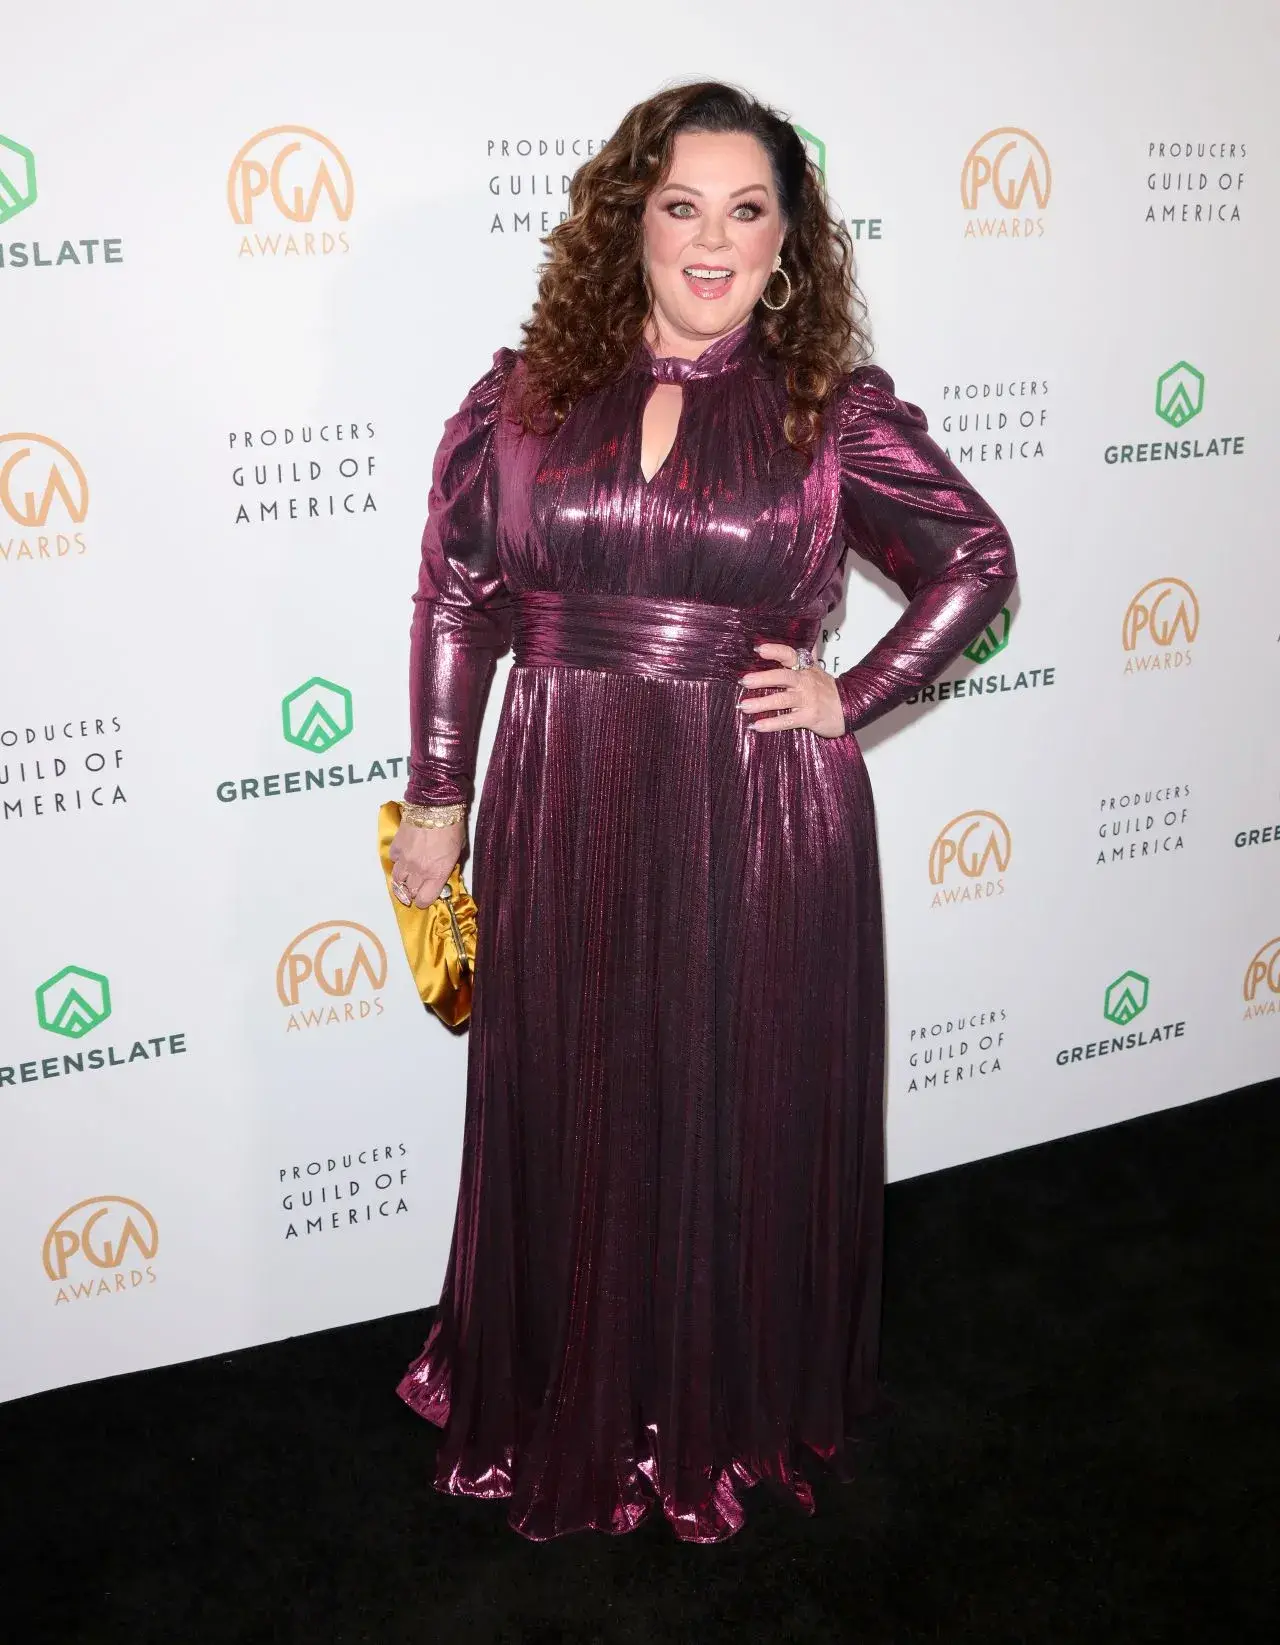 MELISSA MCCARTHY PHOTOSHOOT AT PRODUCERS GUILD AWARDS IN LOS ANGELES 2